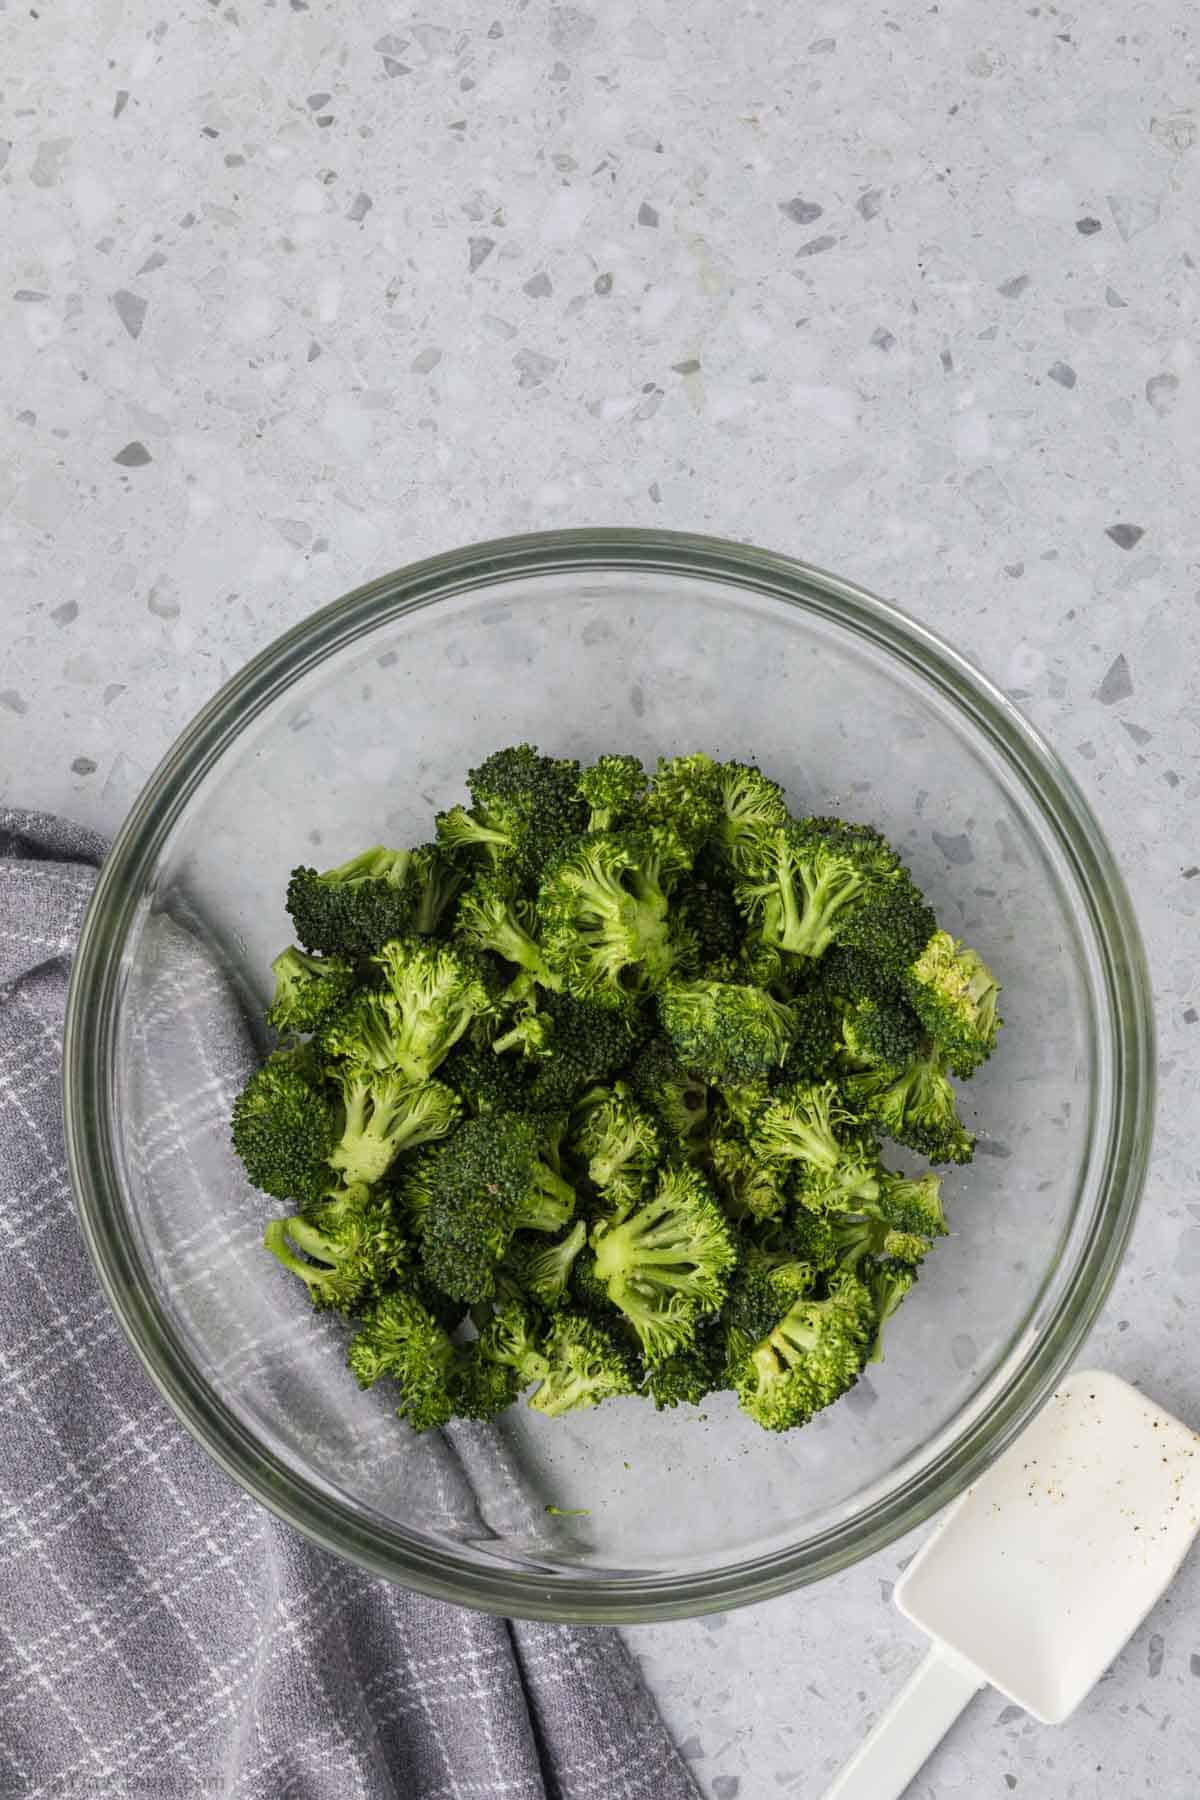 Chopped broccoli in a glass bowl